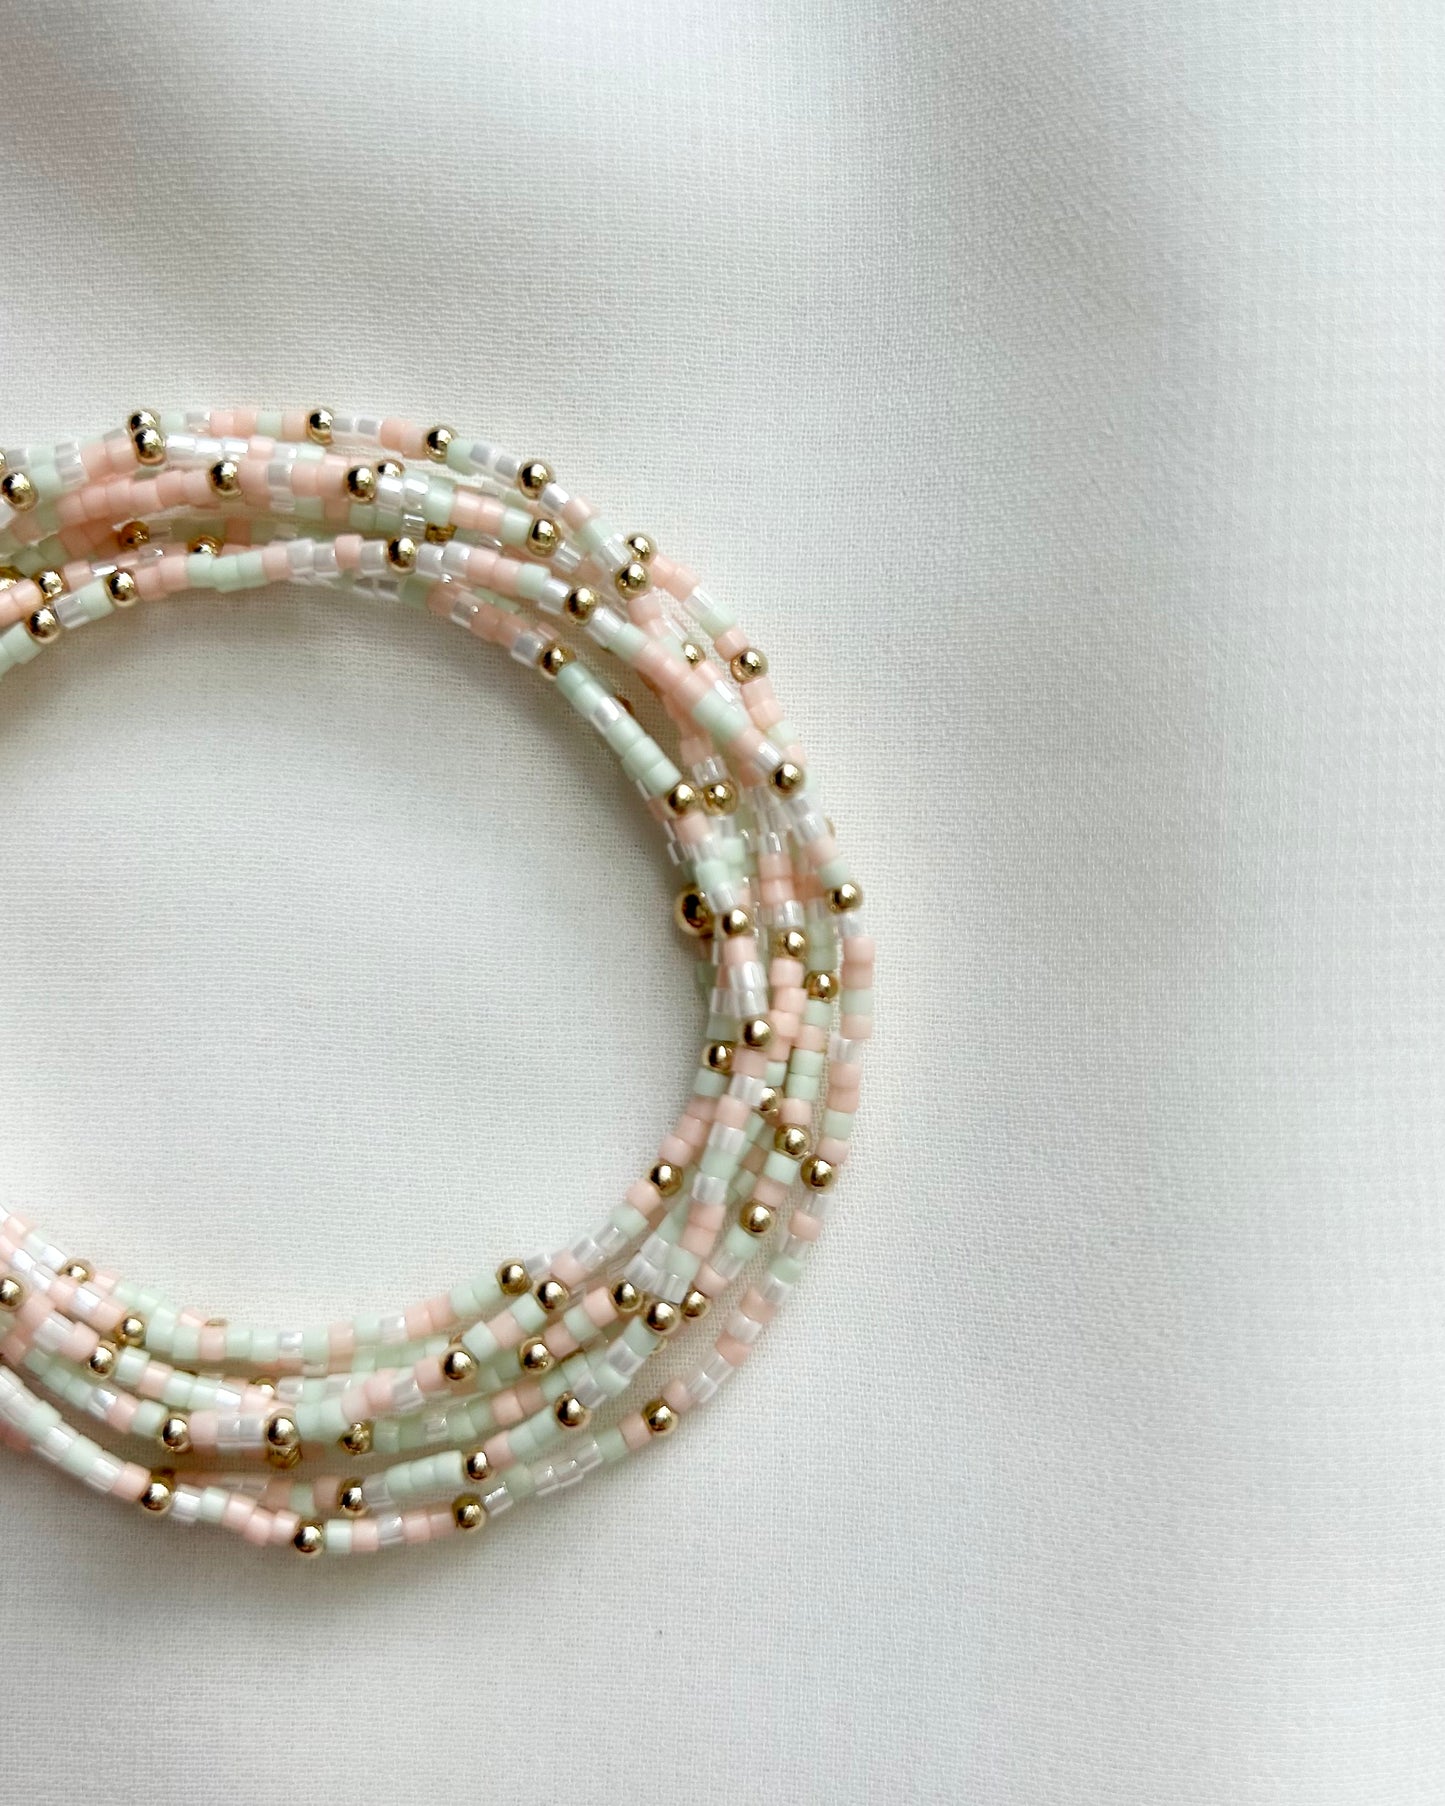 Cotton Candy Seed Bead Bracelet